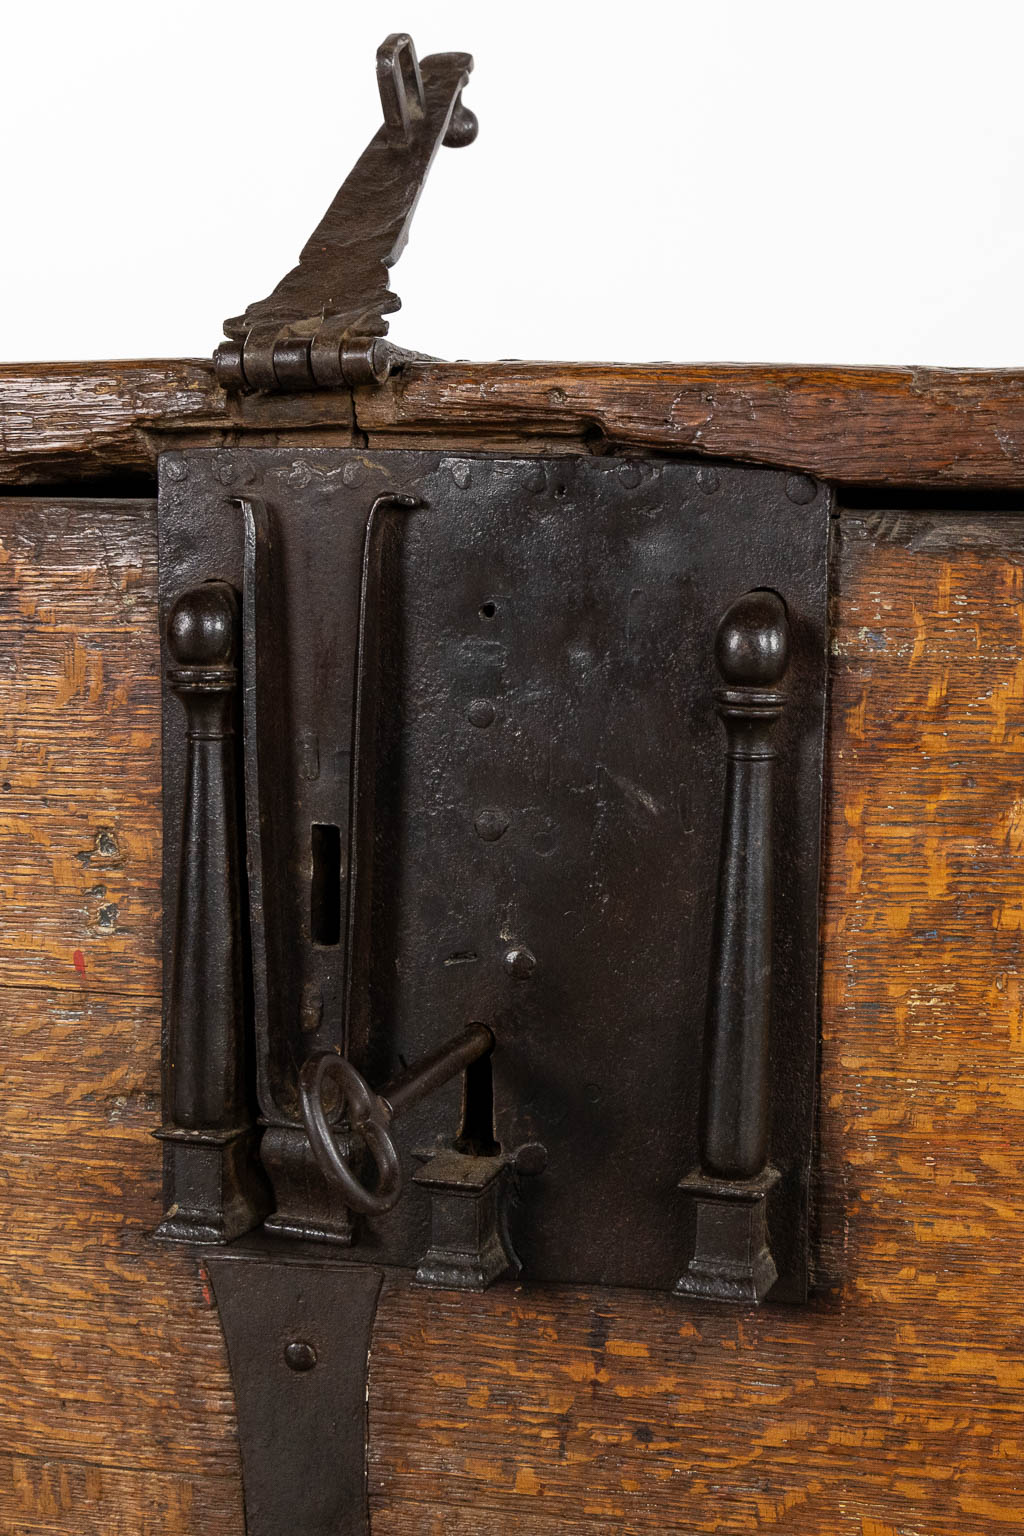 An antique Money box, wood mounted with wrought iron, circa 1500. (L:77 x W:44 x H:50 cm)